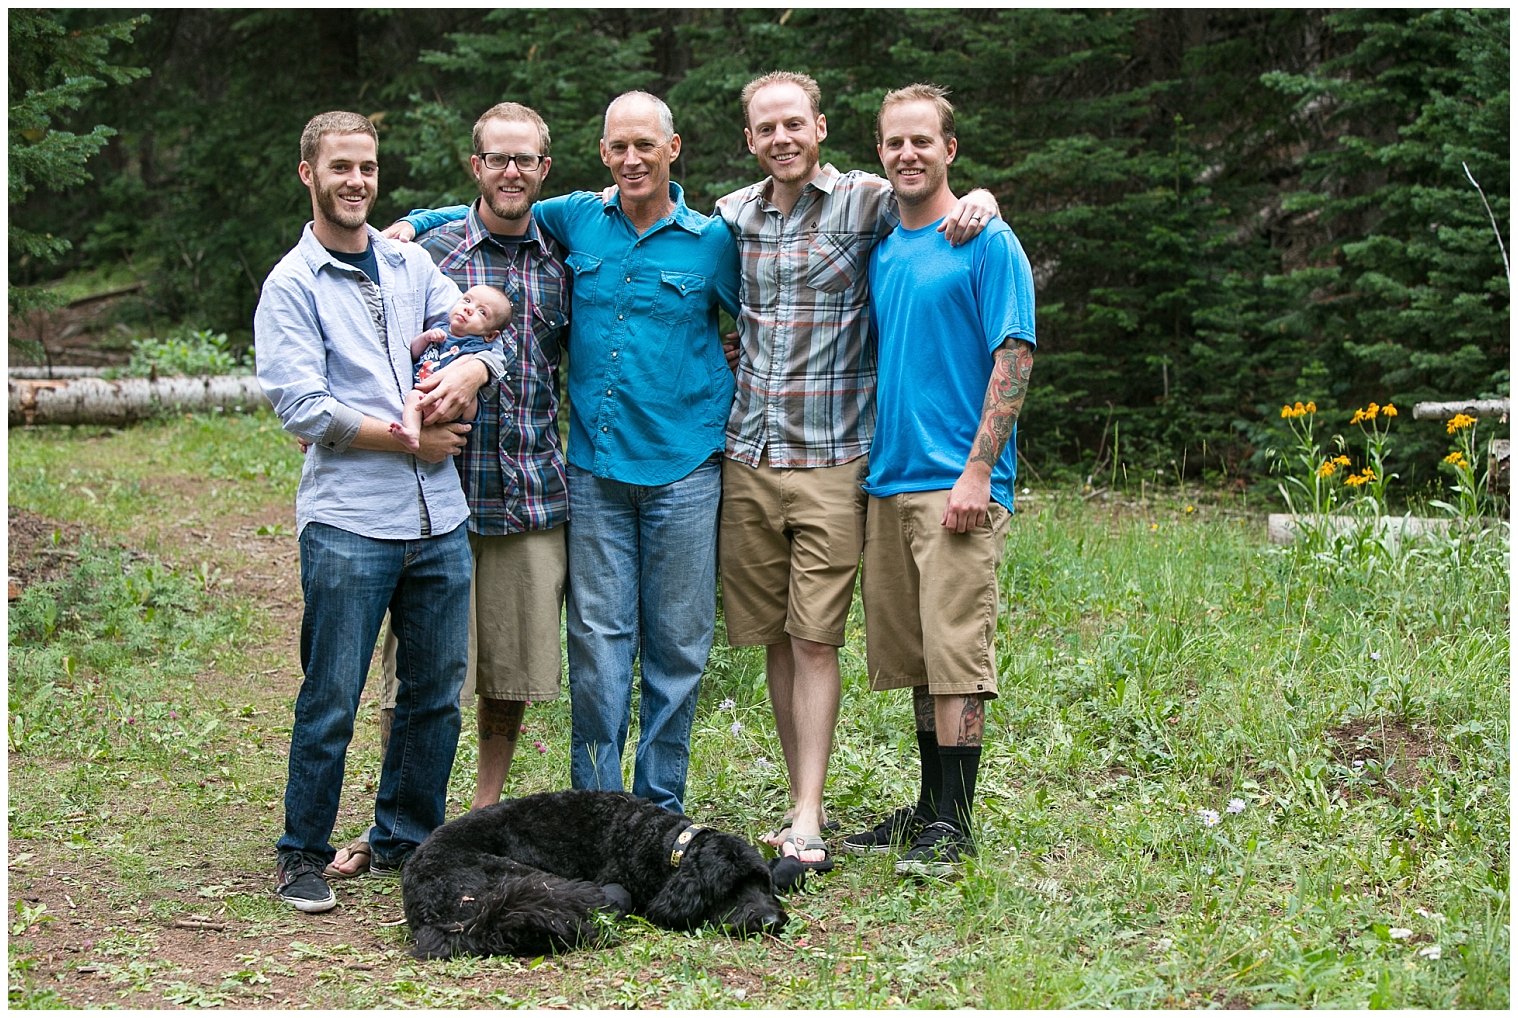 The young men of the family pose together with a baby at an extended family photo shoot in Breckenridge.